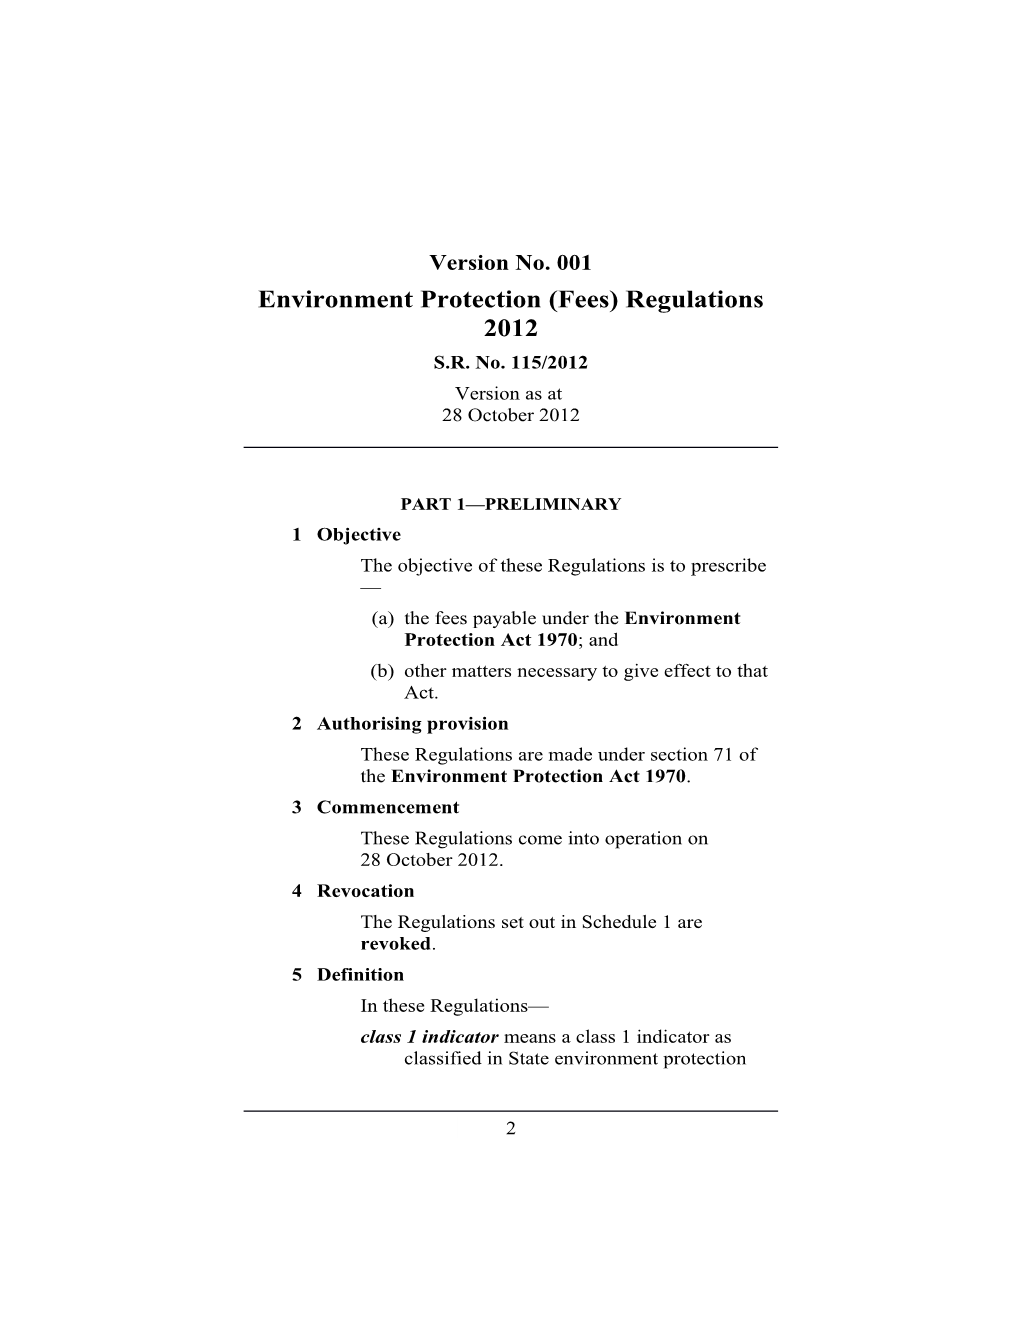 Environment Protection (Fees) Regulations 2012